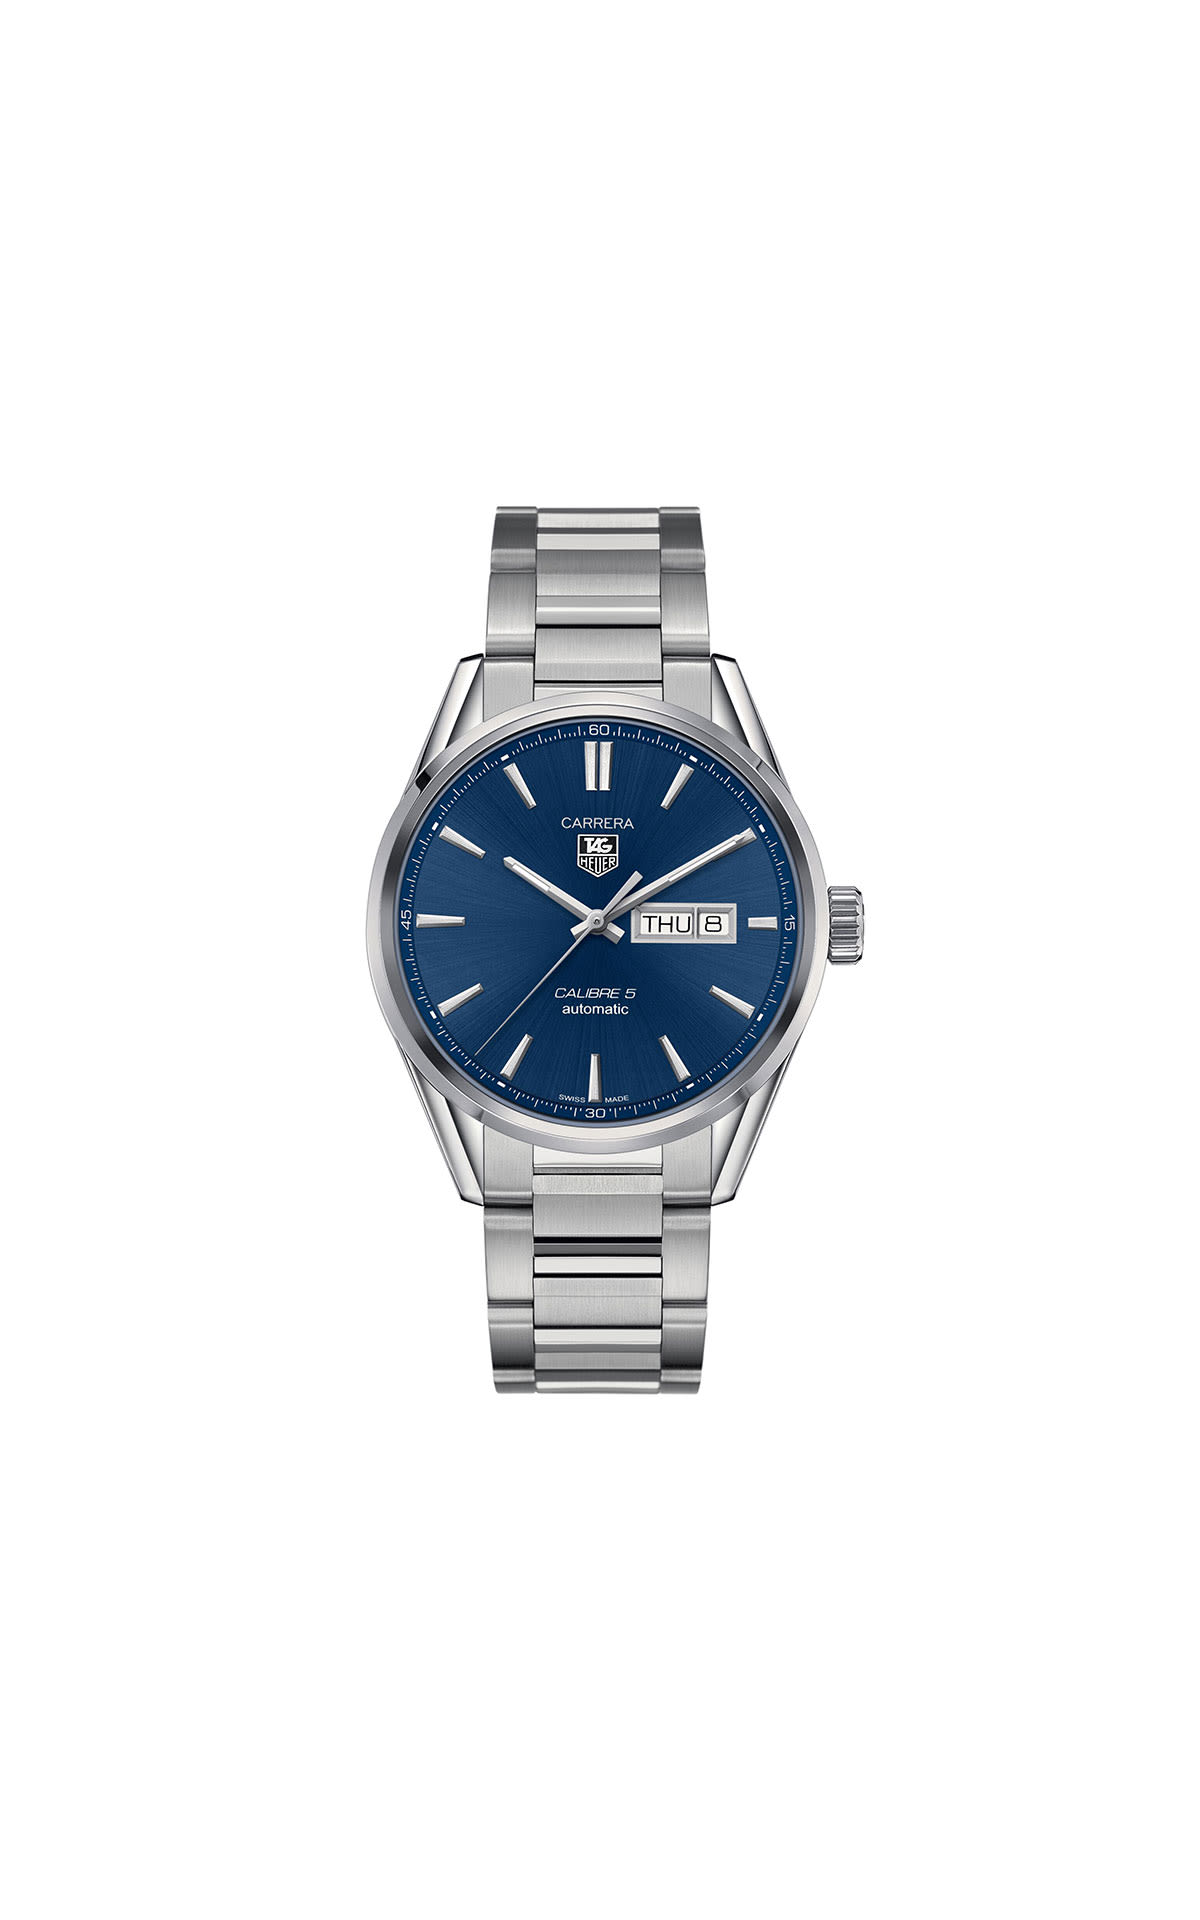 TAG Heuer Men’s carrera from Bicester Village